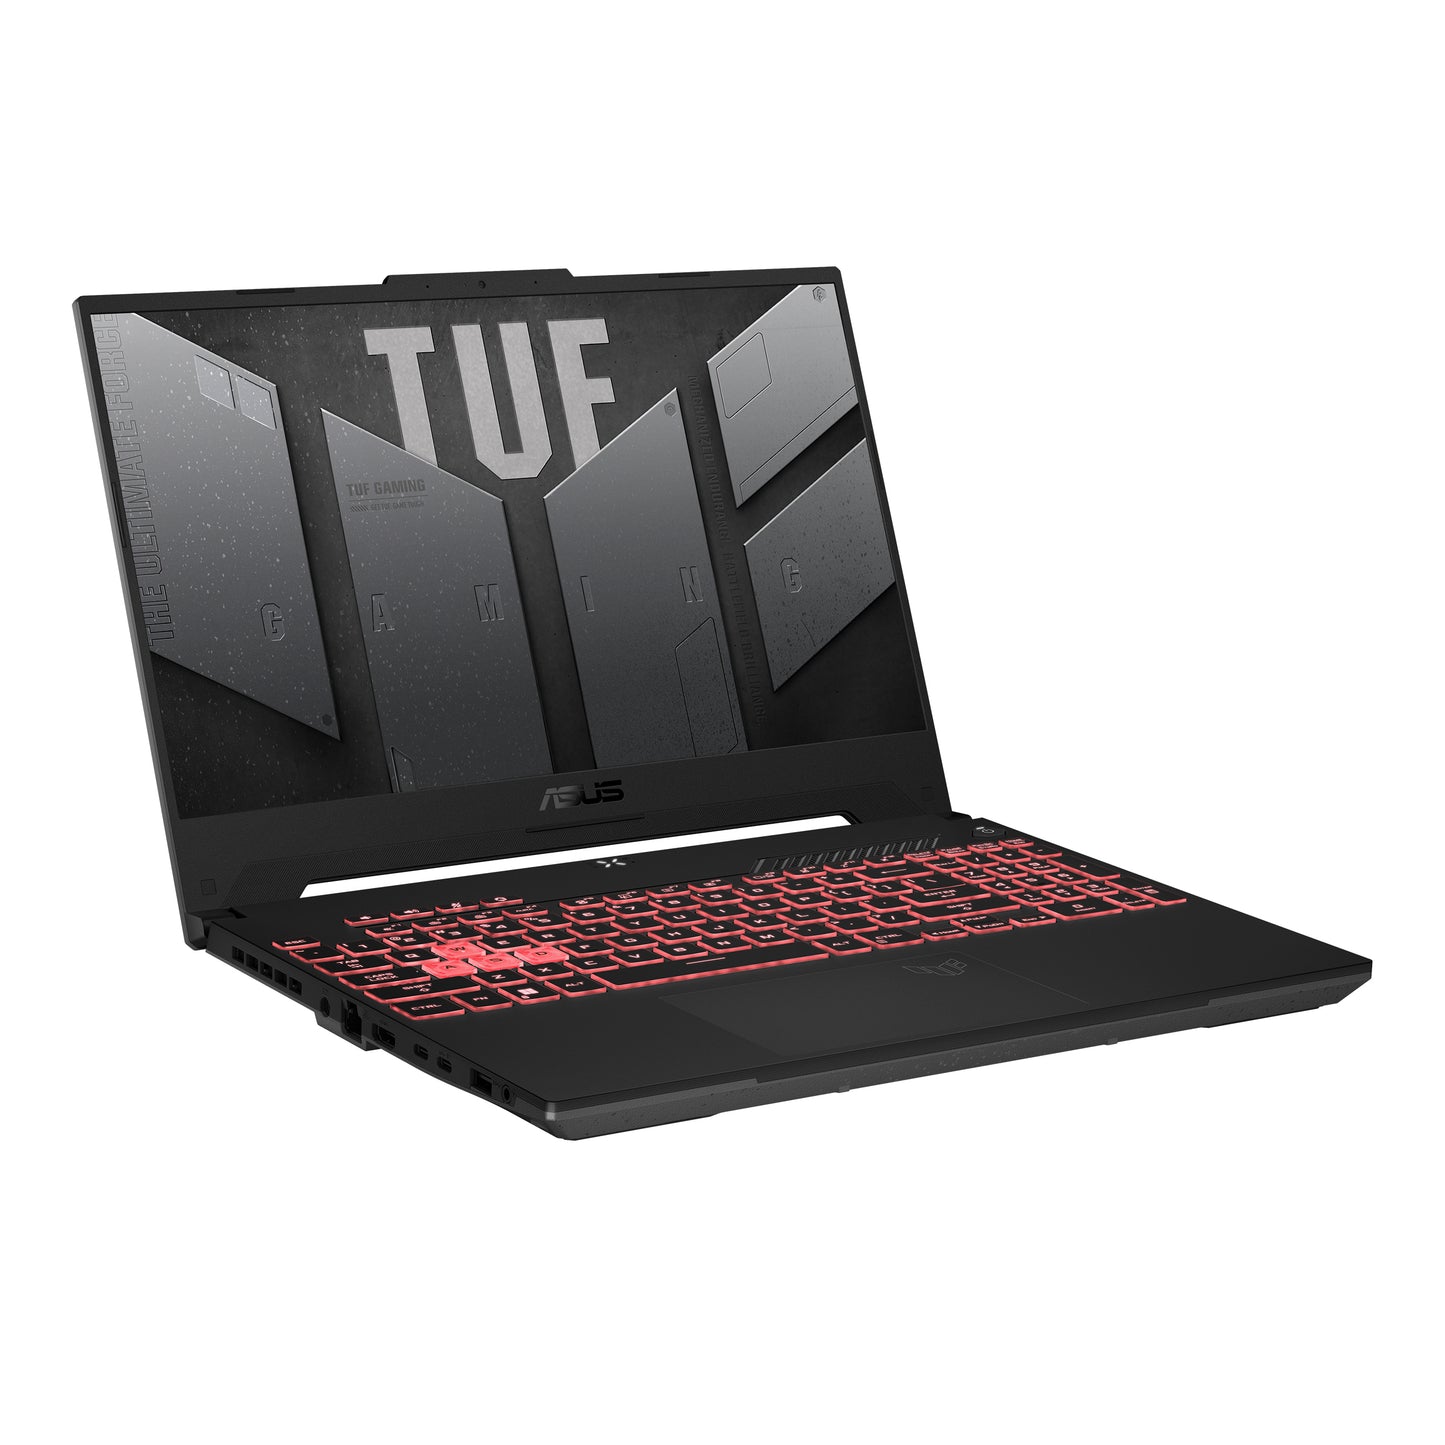 Asus Tuf A15 FA507RM-ES73 Military Grade Ryzen 7 6800h Rtx 3060 300Hz Gaming Laptops (Brand New)